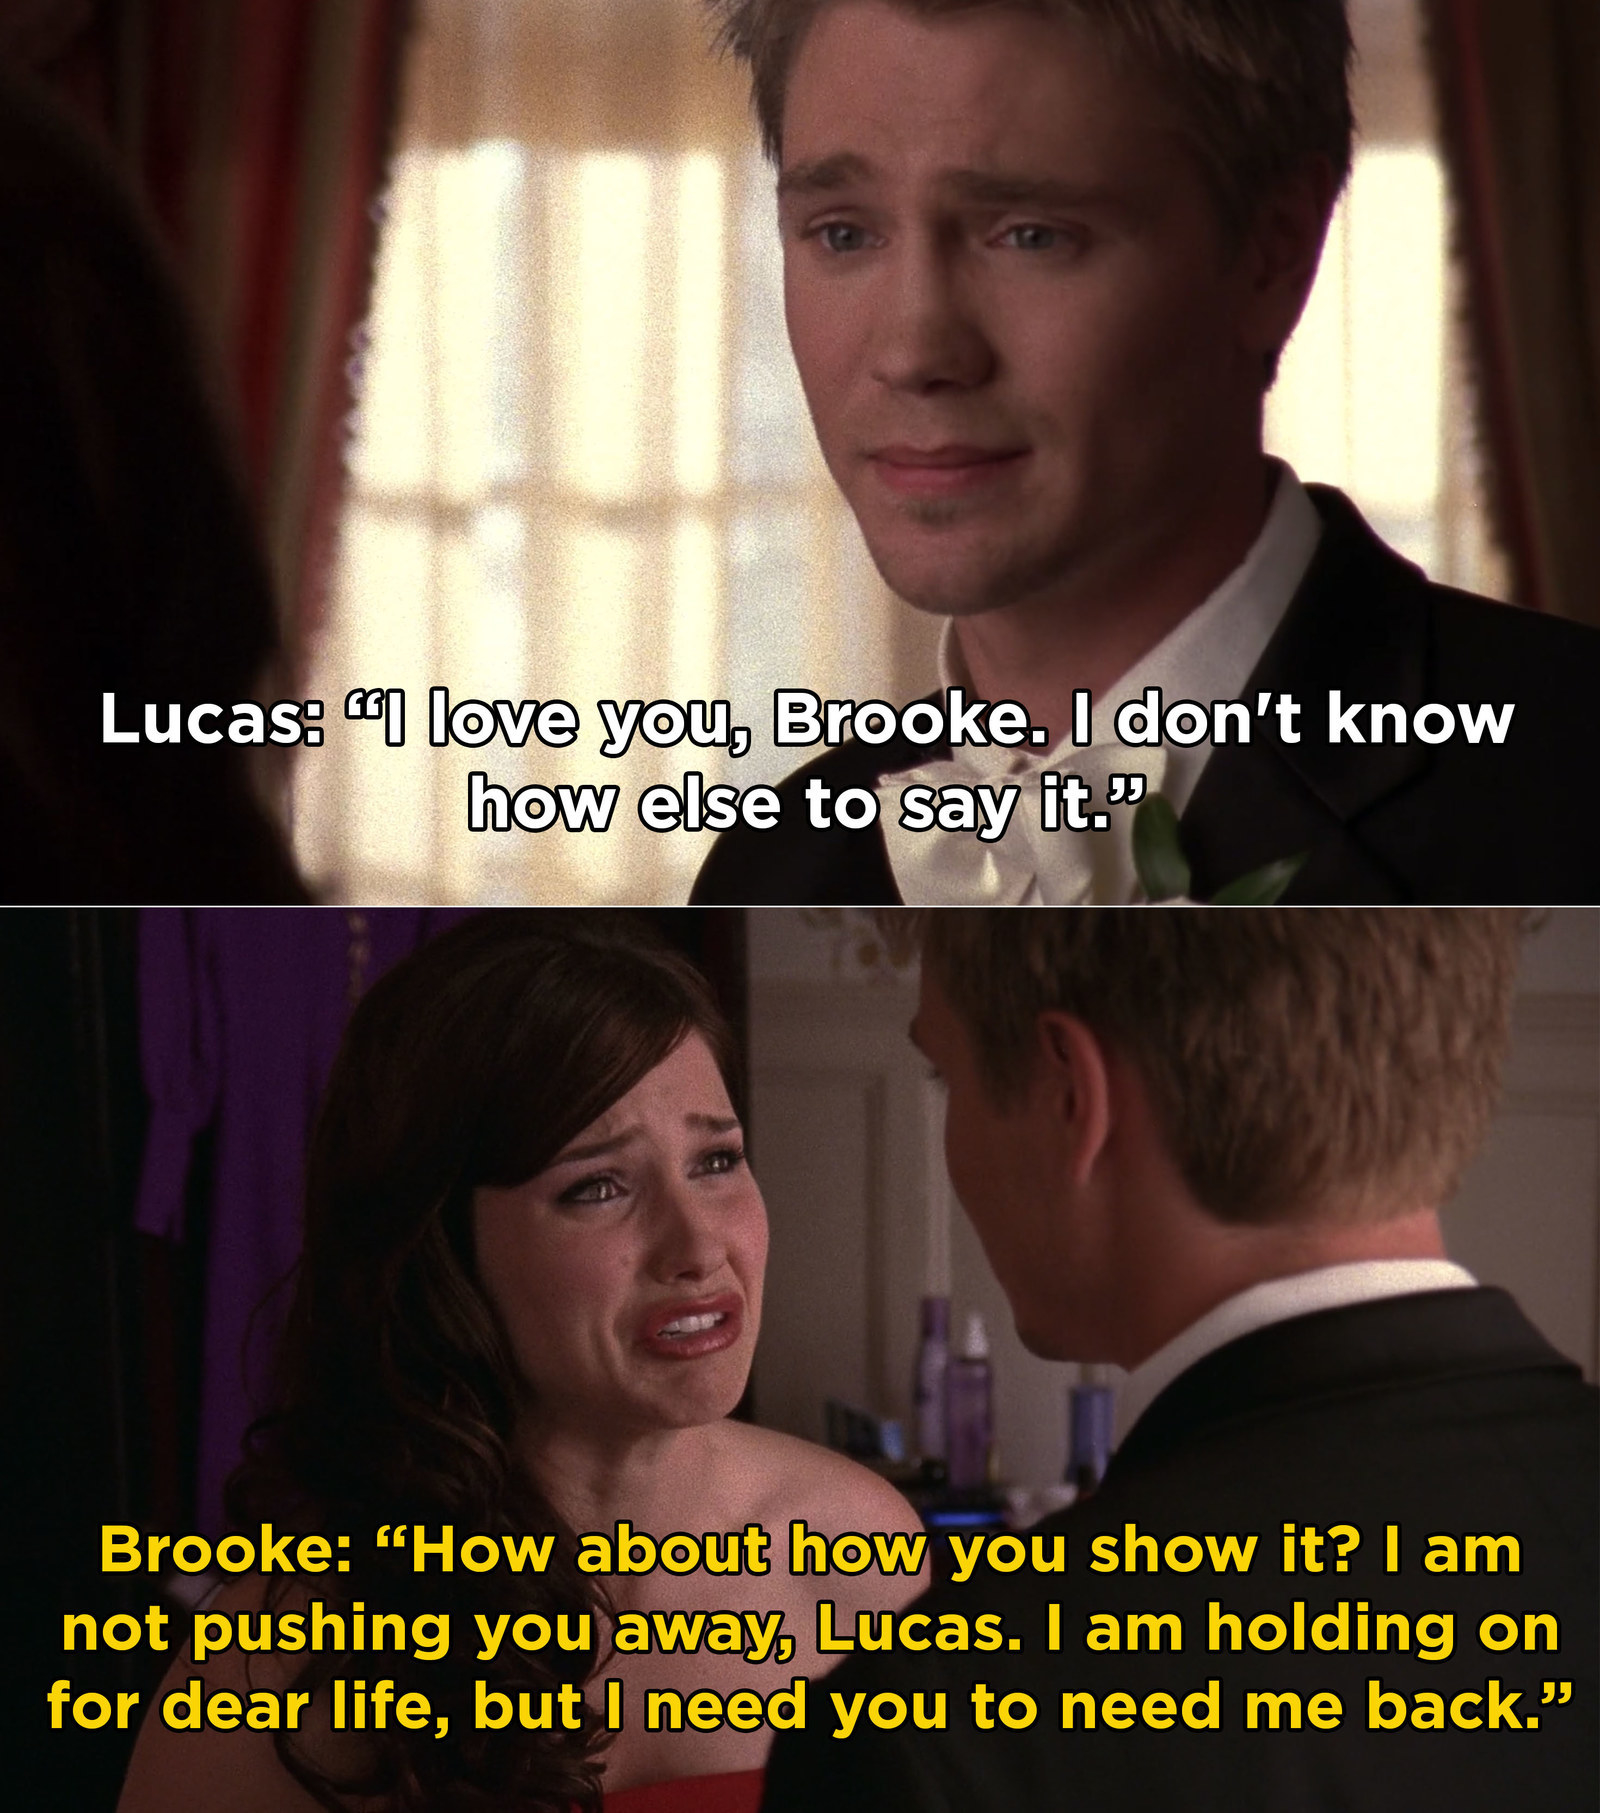 Brooke: &quot;I&#x27;m not pushing you away Lucas, I am holding on for dear life but I need you to need me back&quot;